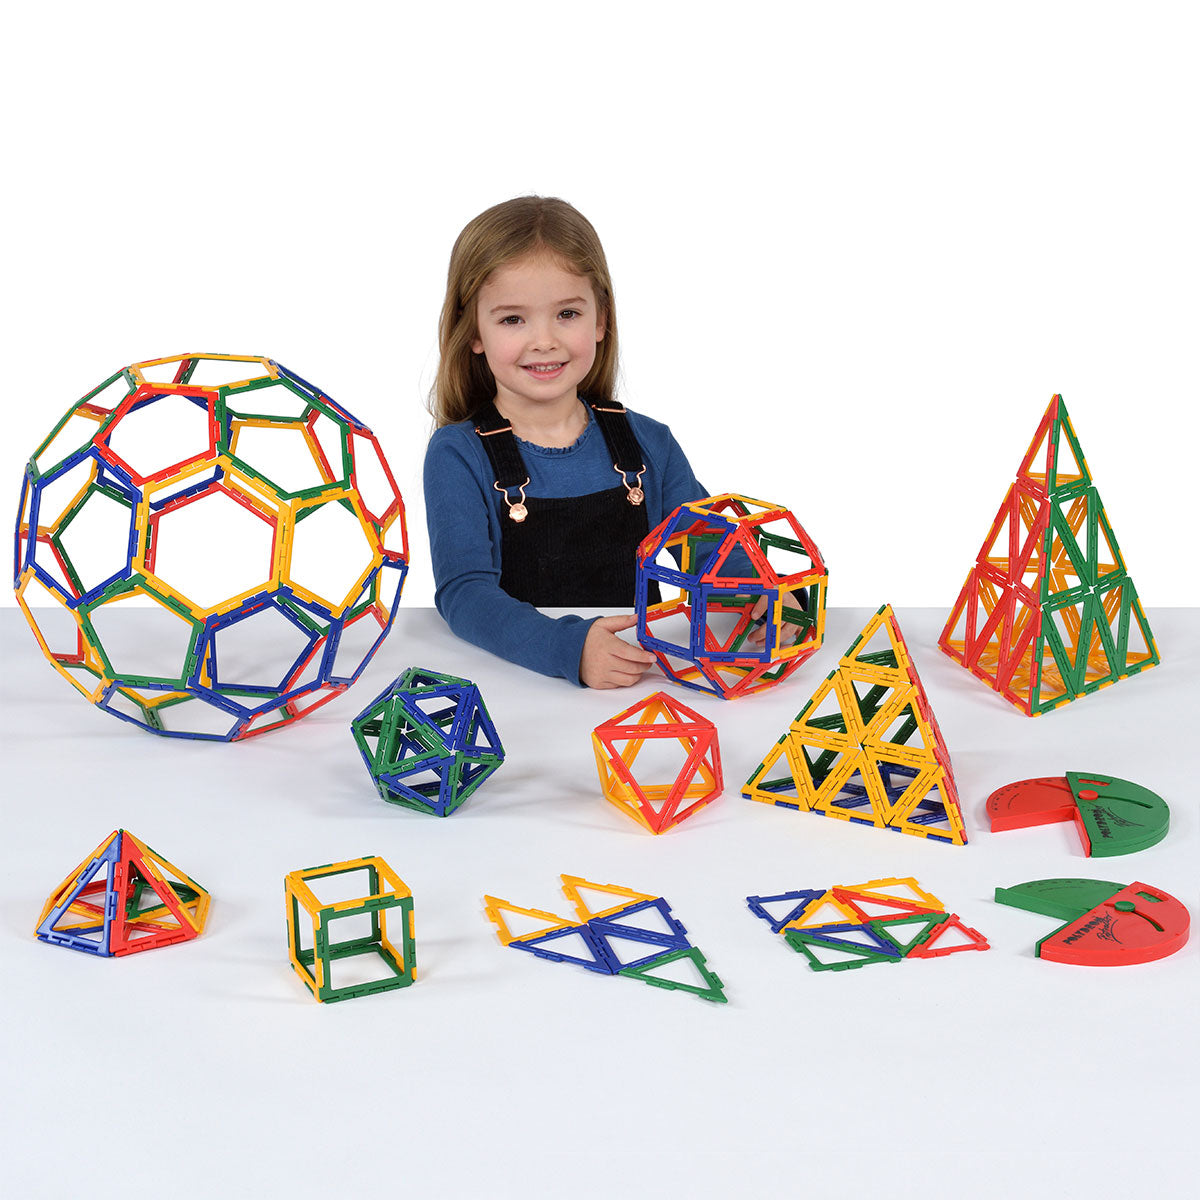 Polydron Frameworks Geometry Set, The Polydron Frameworks Geometry Set is an innovative and versatile educational tool designed for use in the classroom. Building upon the success of the original Polydron, this next-generation set offers a wide range of benefits and features that make it perfect for both teachers and students.With a total of 268 pieces, the set includes a variety of shapes such as hexagons, squares, equilateral triangles, pentagons, right angle triangles, isosceles triangles, large equilate